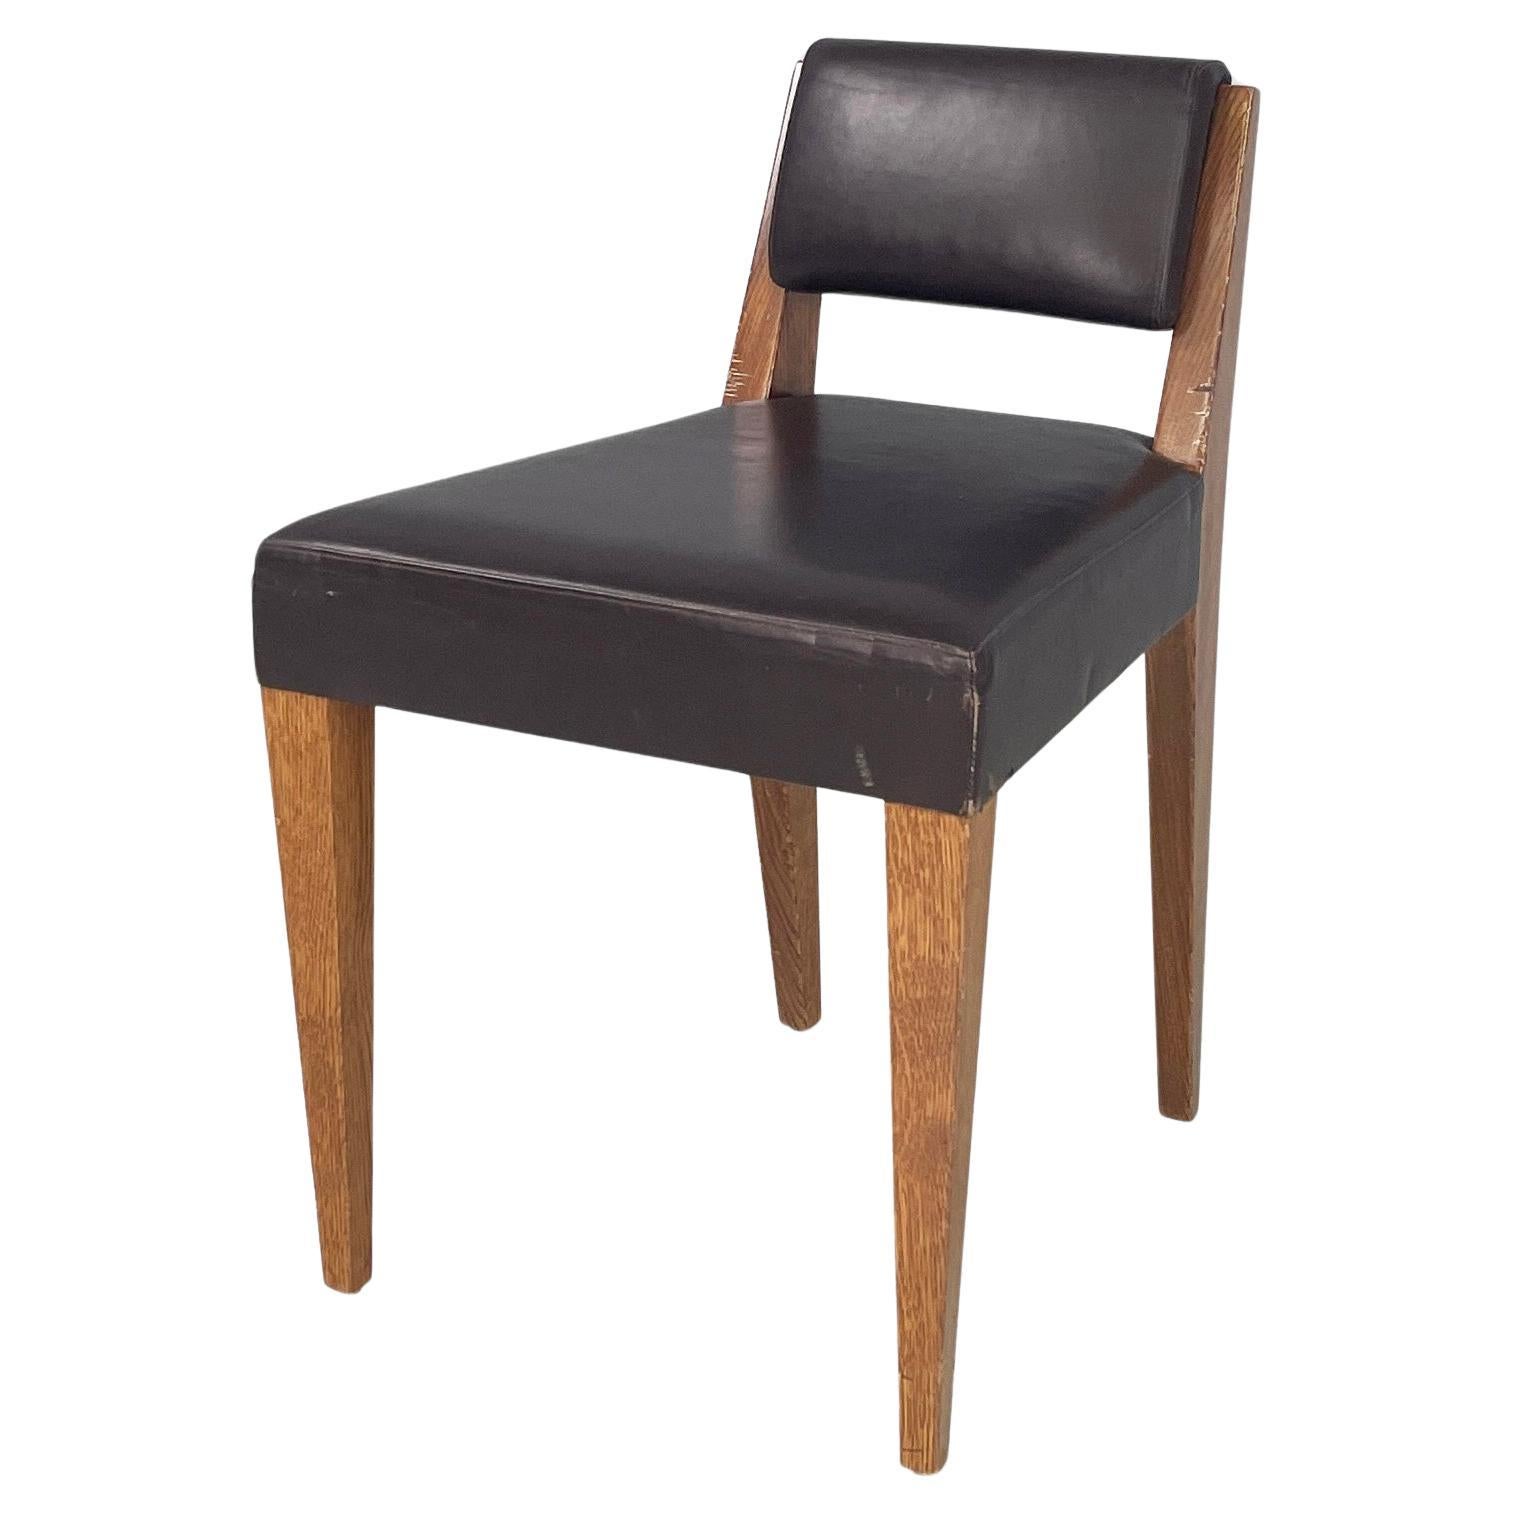 Italian modern Brown leather and wood chair by B&B, 1980s